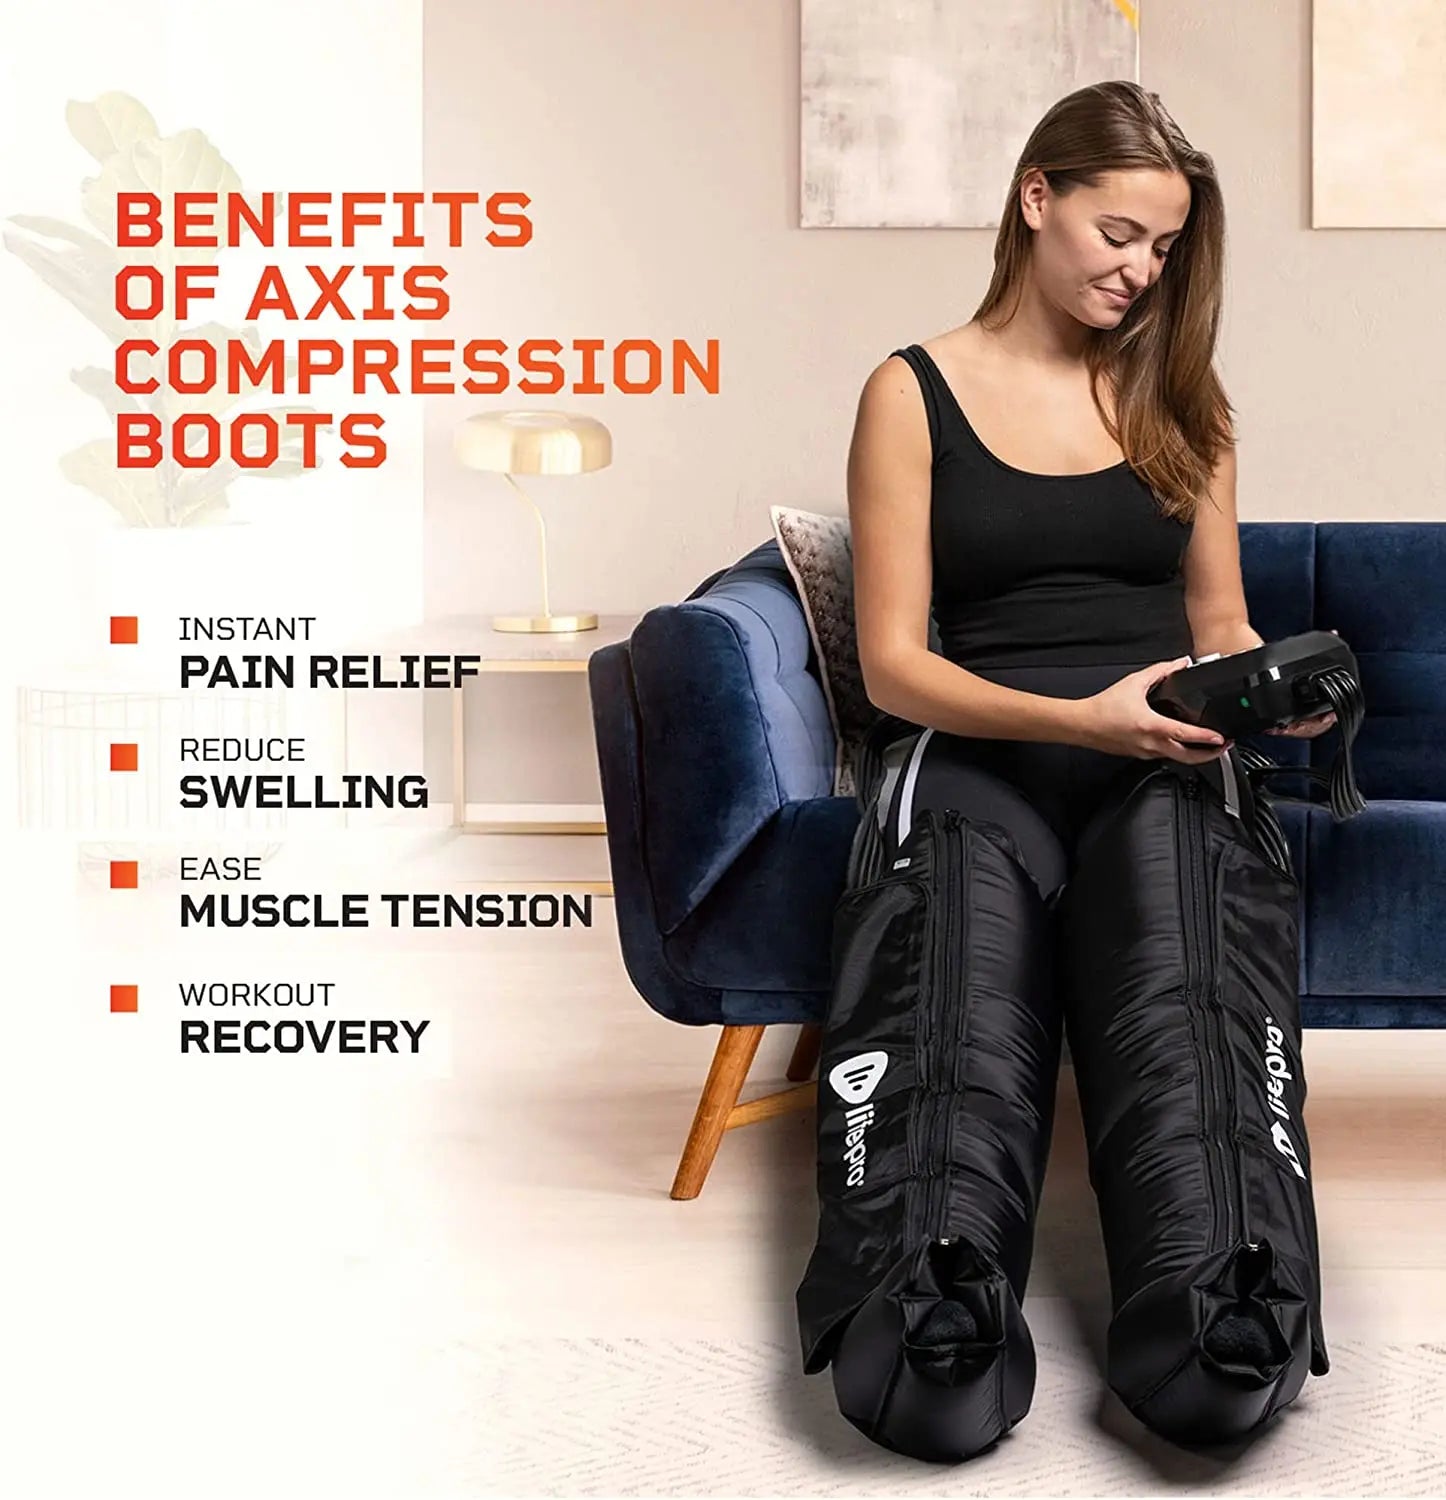 THE 3 MOST IMPORTANT BENEFITS OF COMPRESSION BOOTS FOR RECOVERY